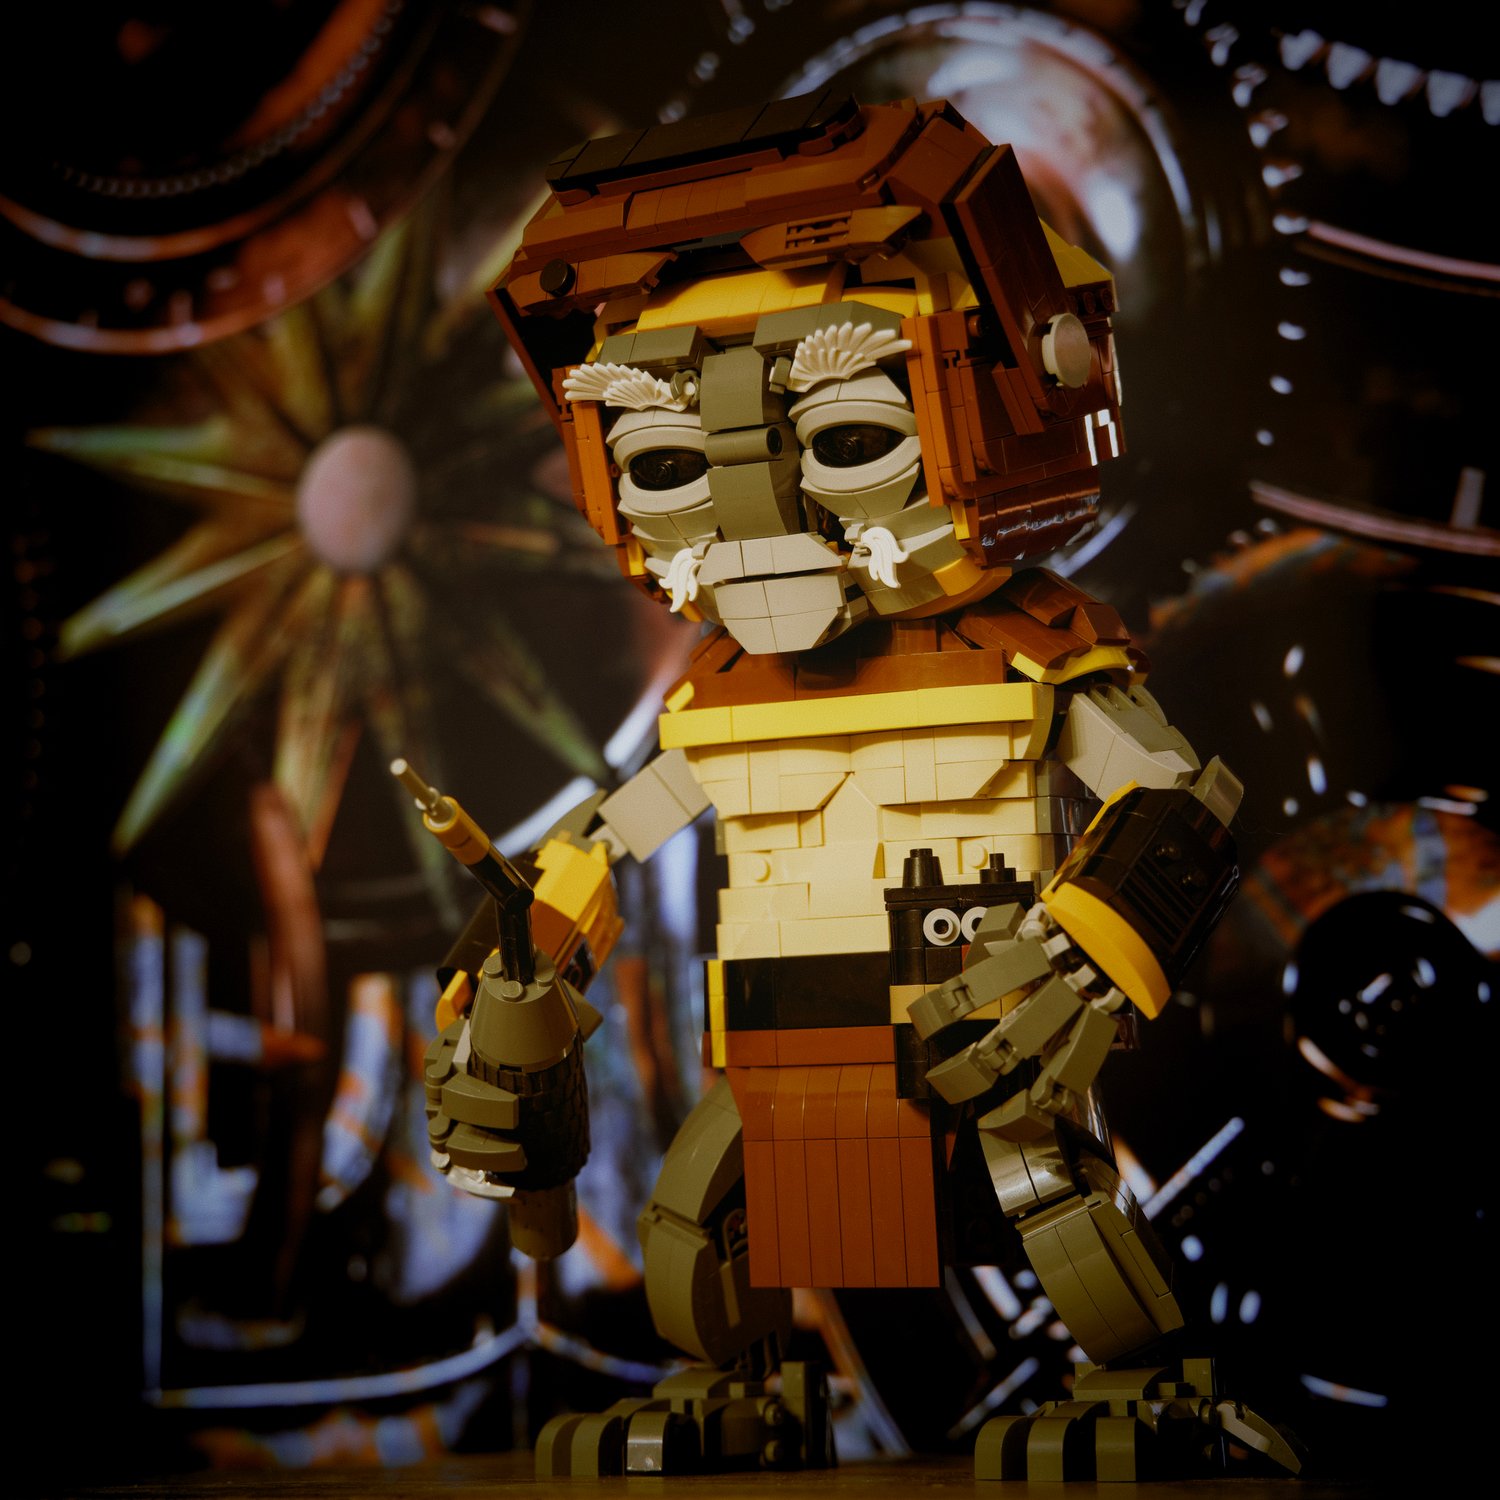 The adorable droidsmith from Star Wars, LEGO Babu Frik